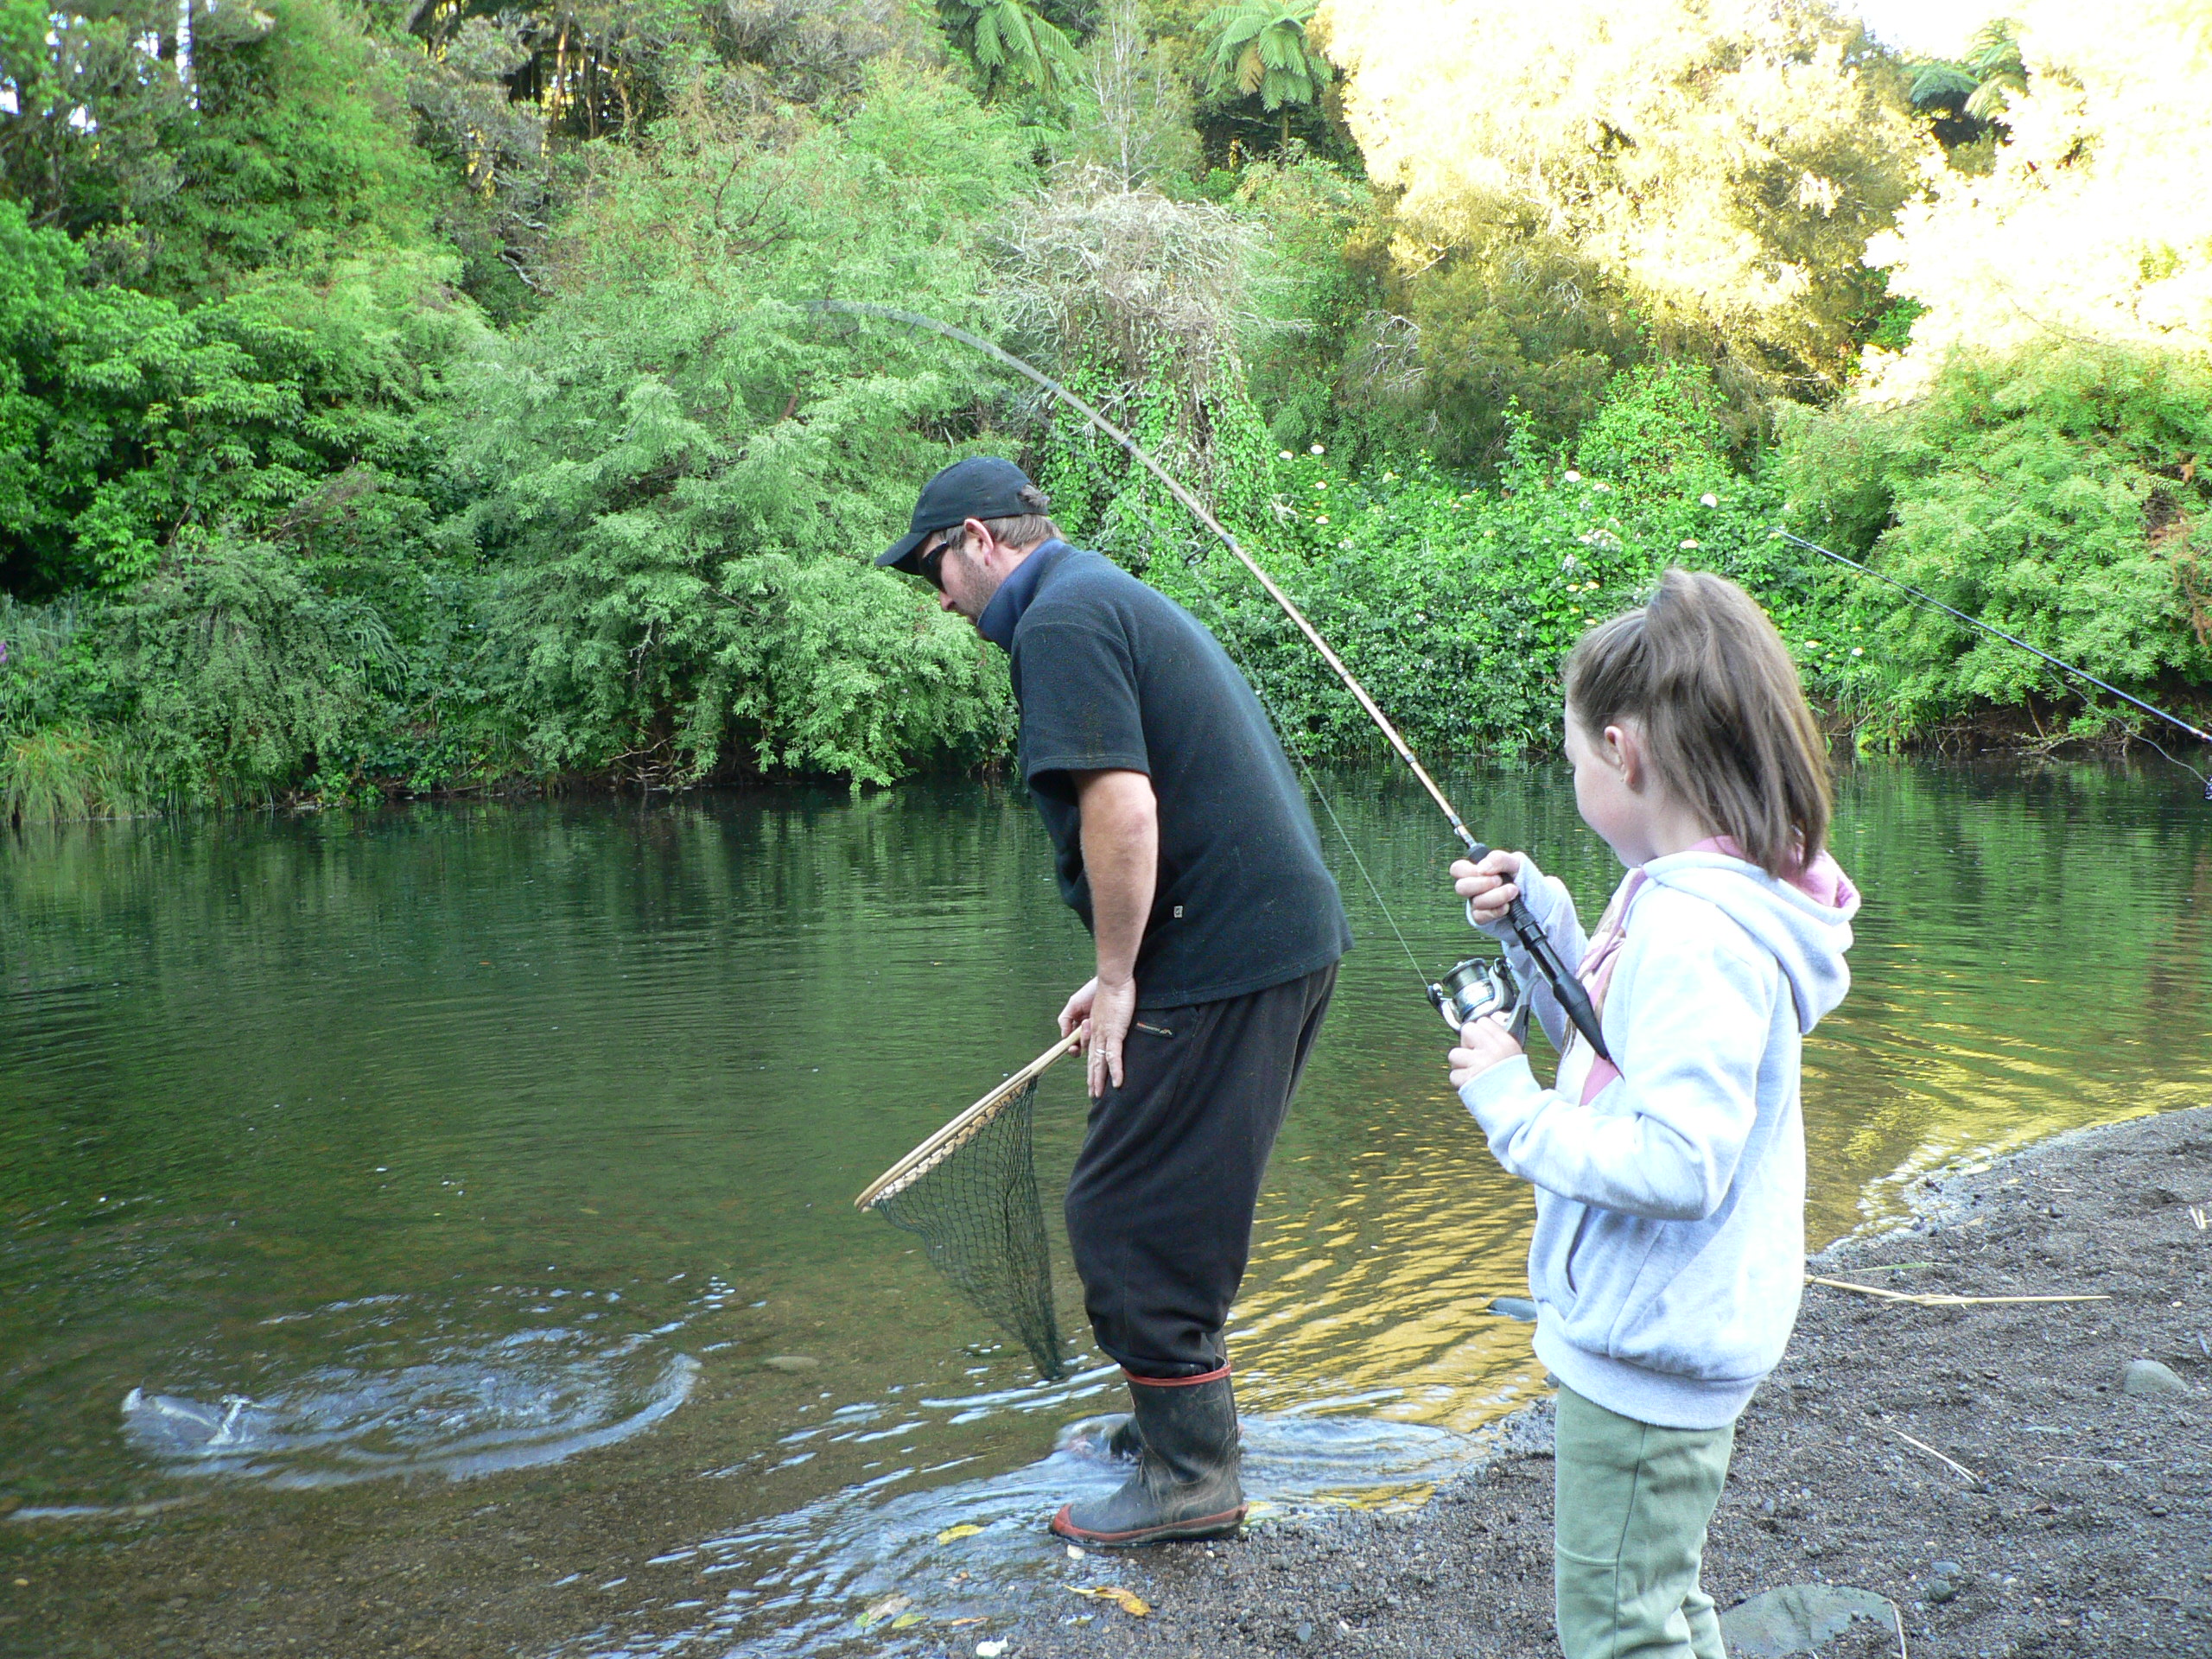 TRL2Jan19. McKenzie Reed plays a trout at the Stratford fishing day with volunteer Kingsley Young at the ready